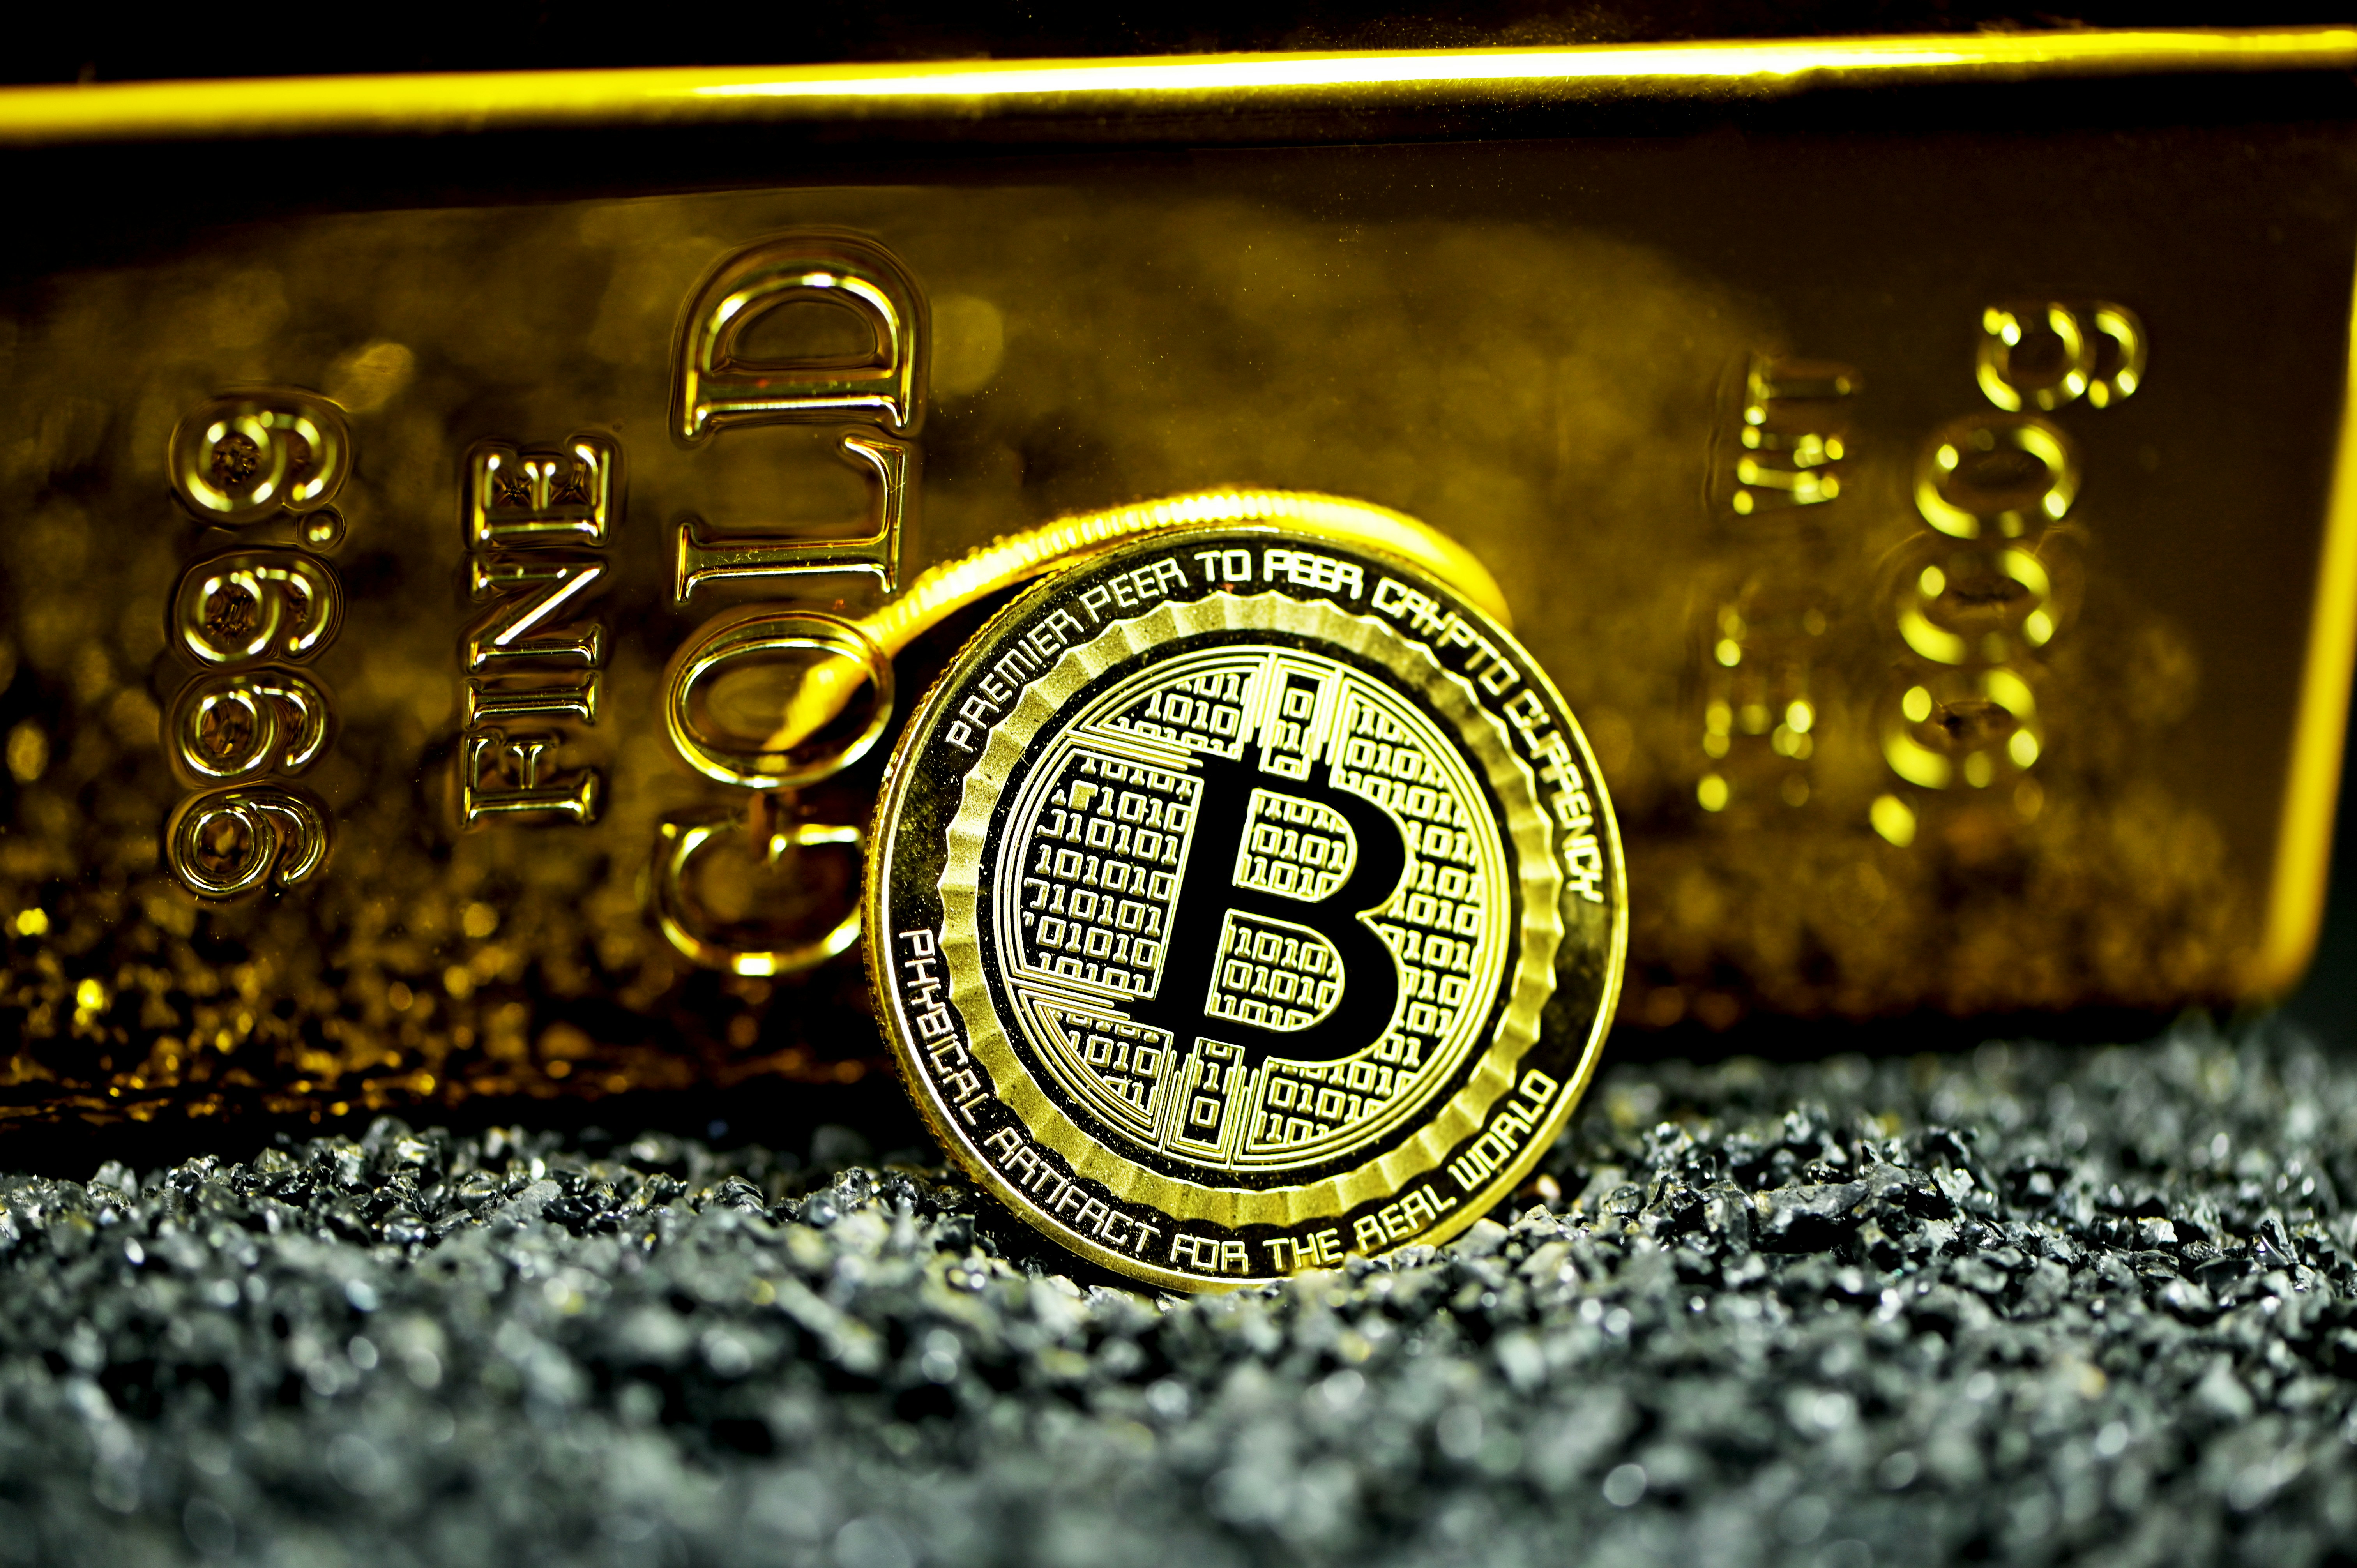 Bitcoin propped up against gold bullion on black stones.